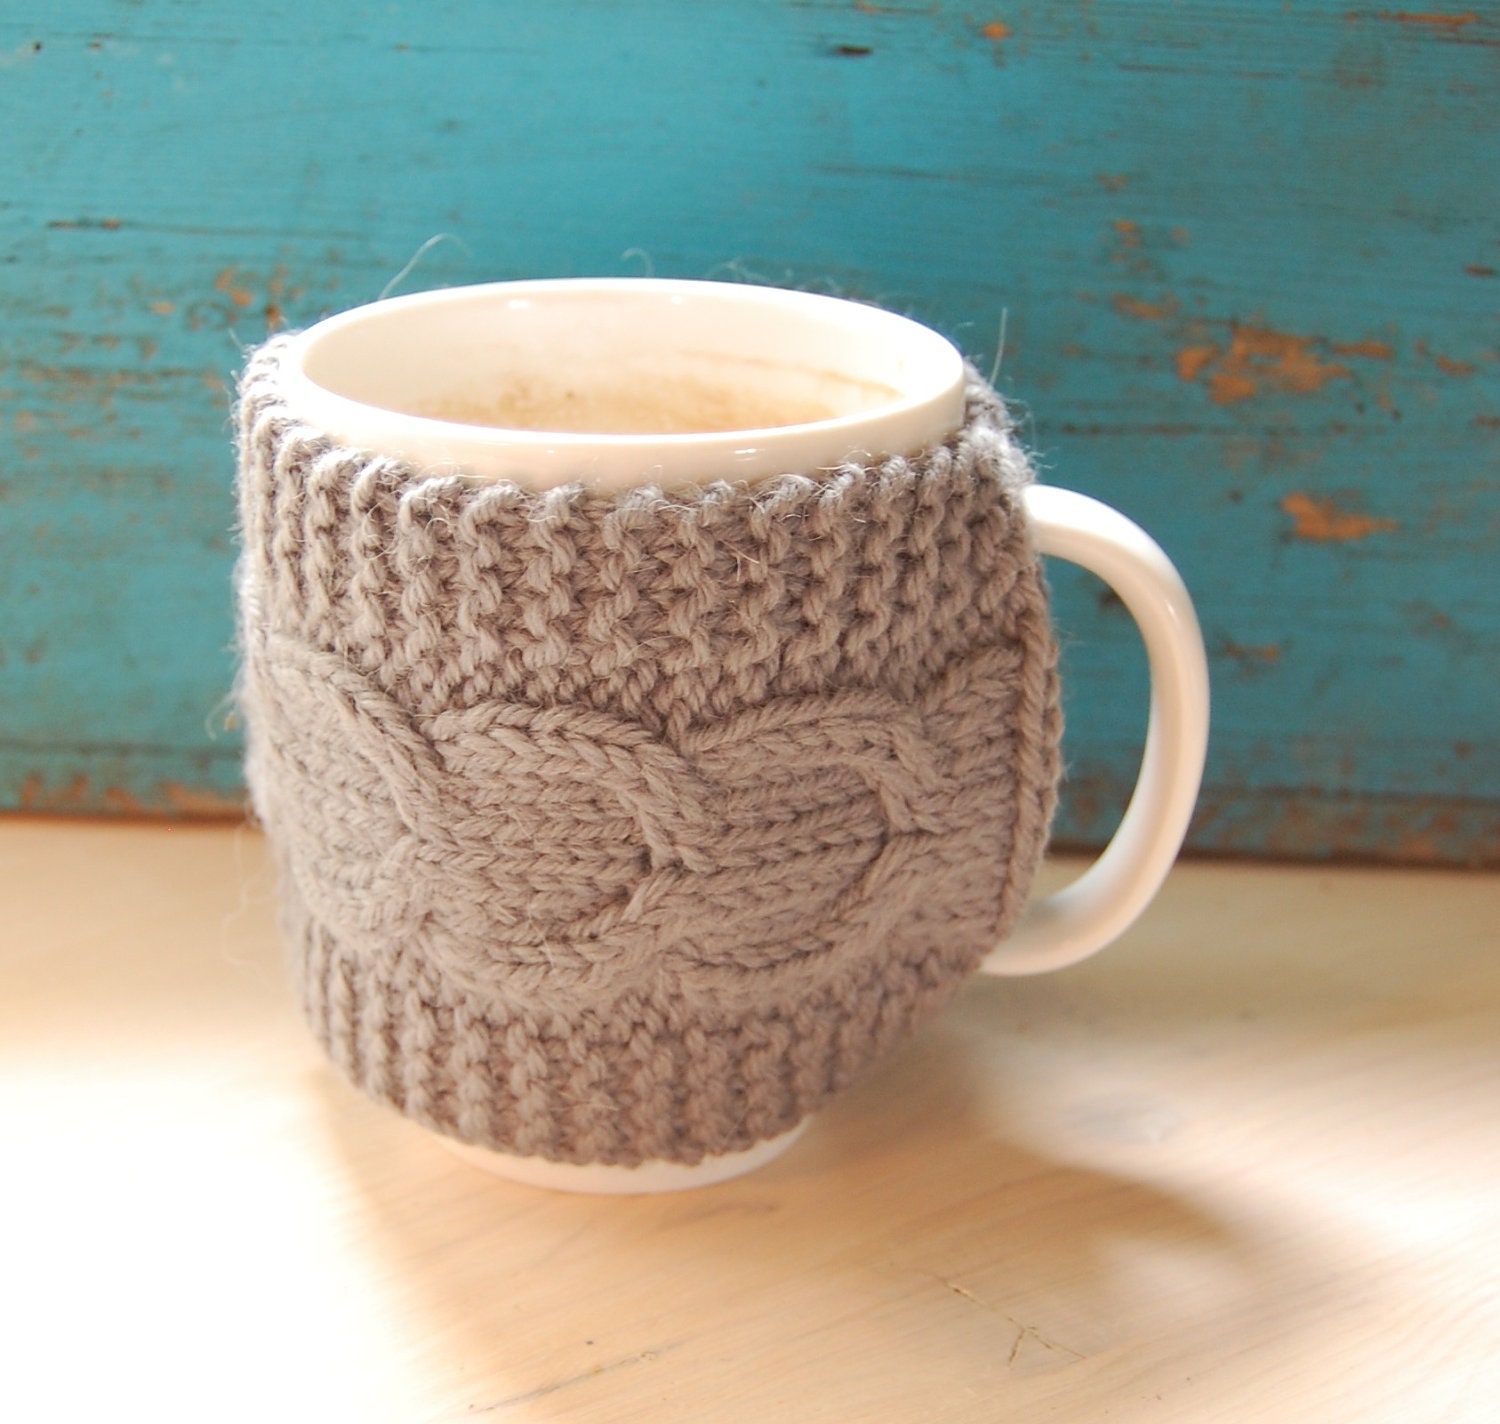 Knit coffee mug cozy with cable pattern, hand knitted, grey